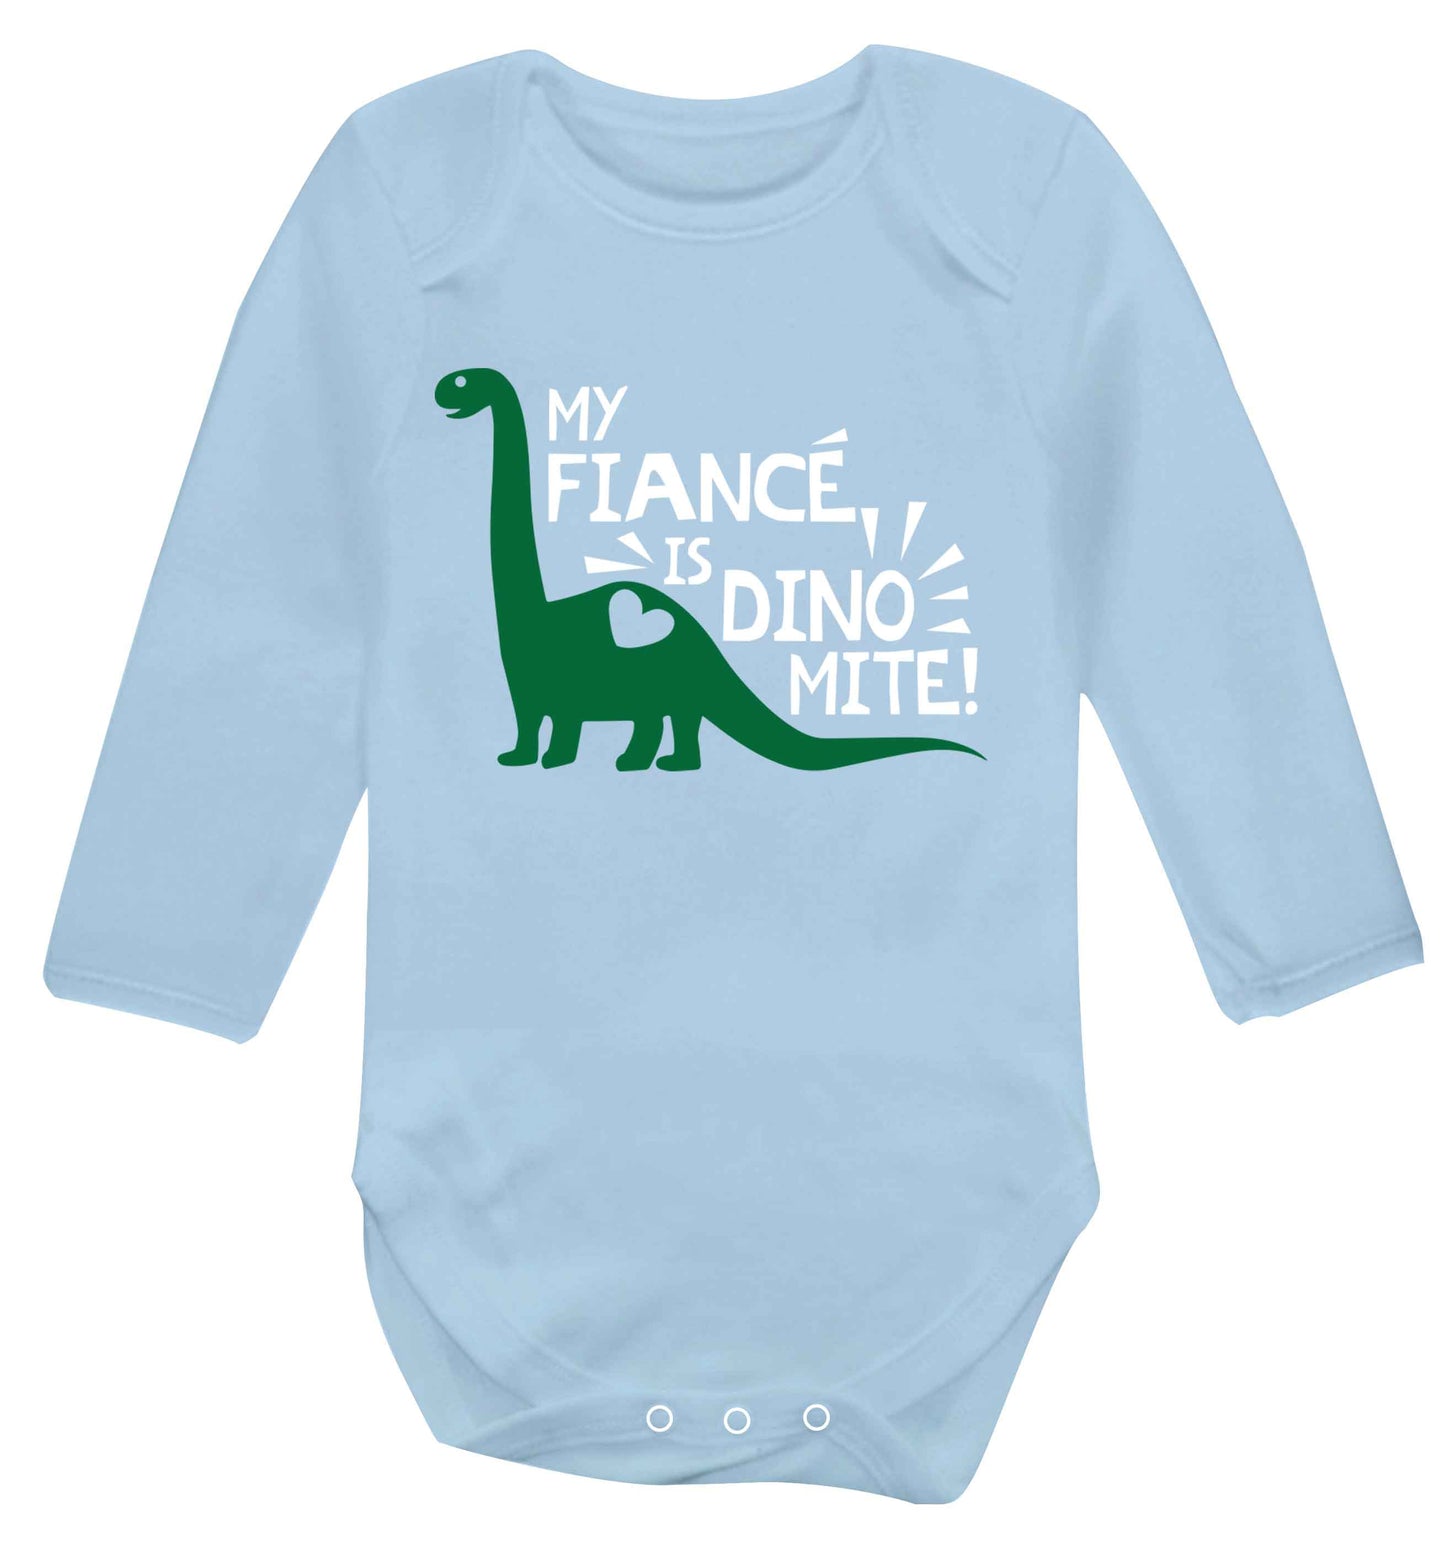 My fiance is dinomite! Baby Vest long sleeved pale blue 6-12 months